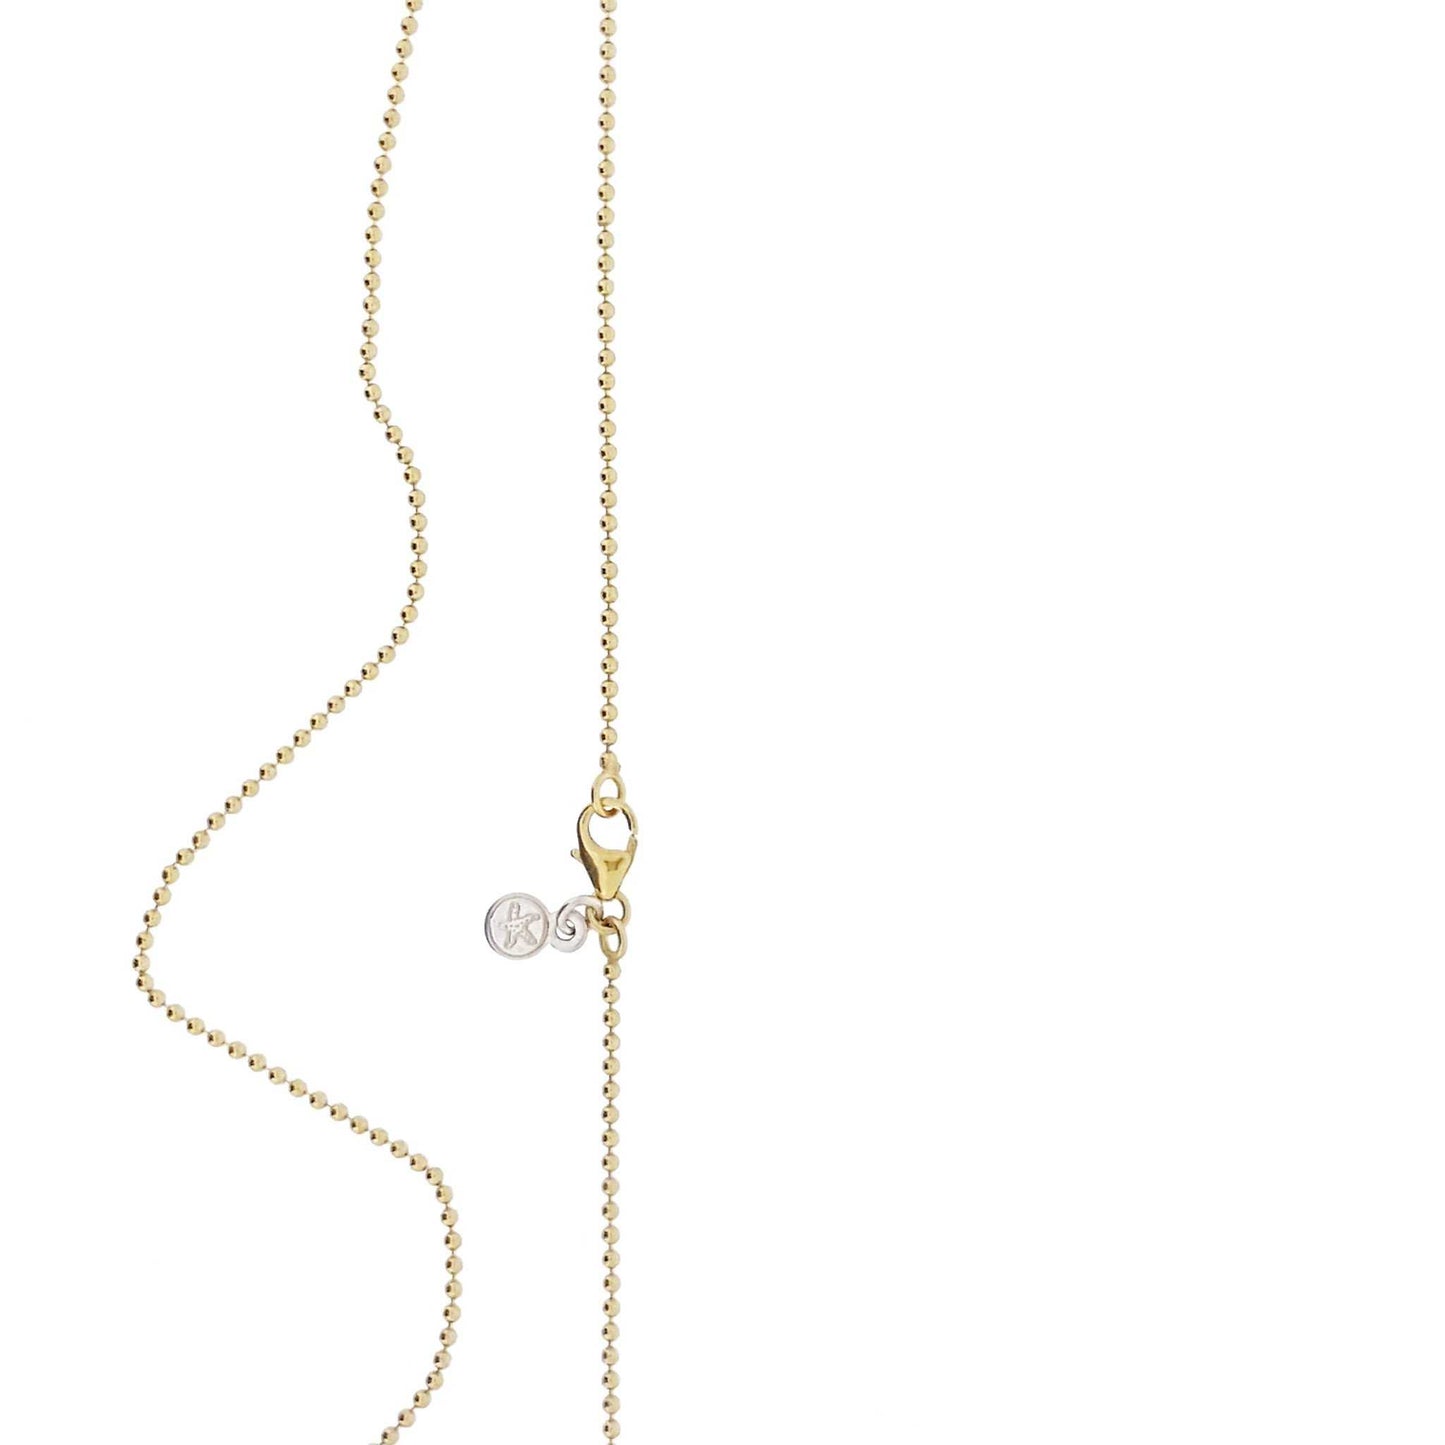 Gold Chain 'Bubble' - The Courthouse Collection